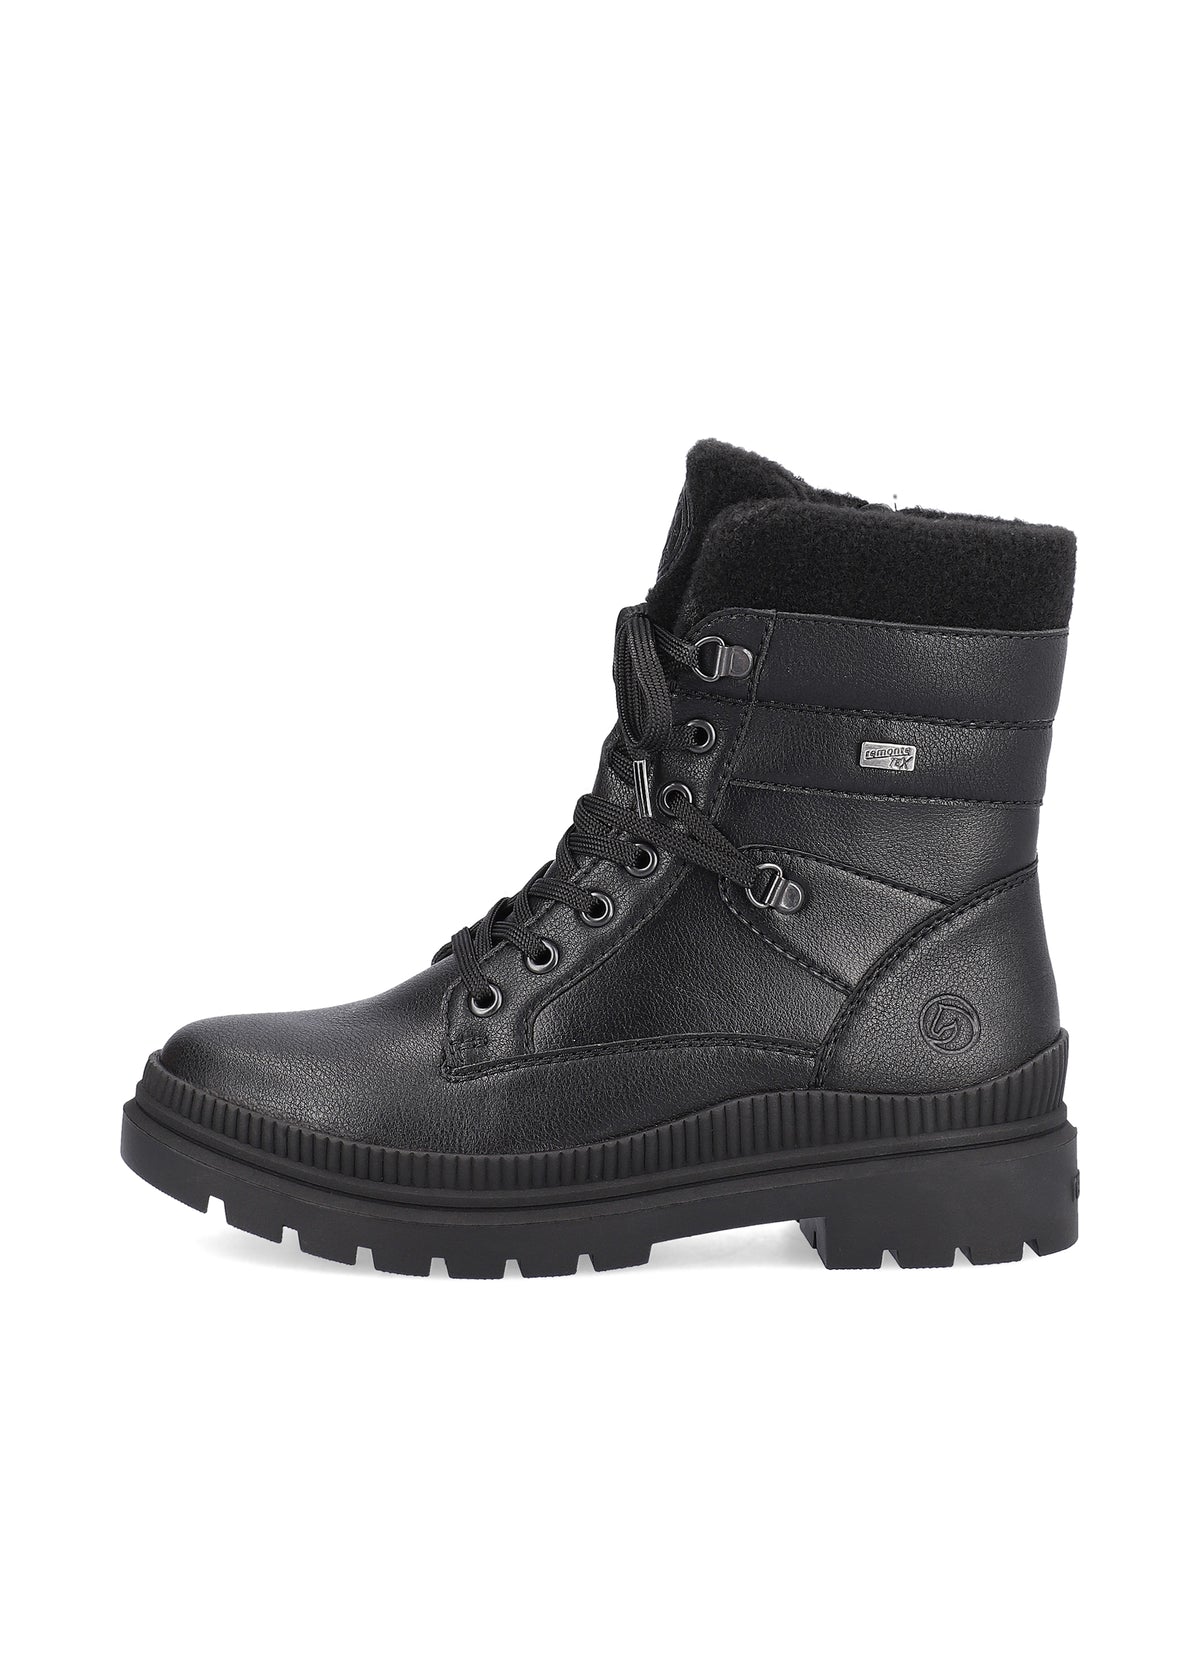 Winter ankle boots with friction sole - black